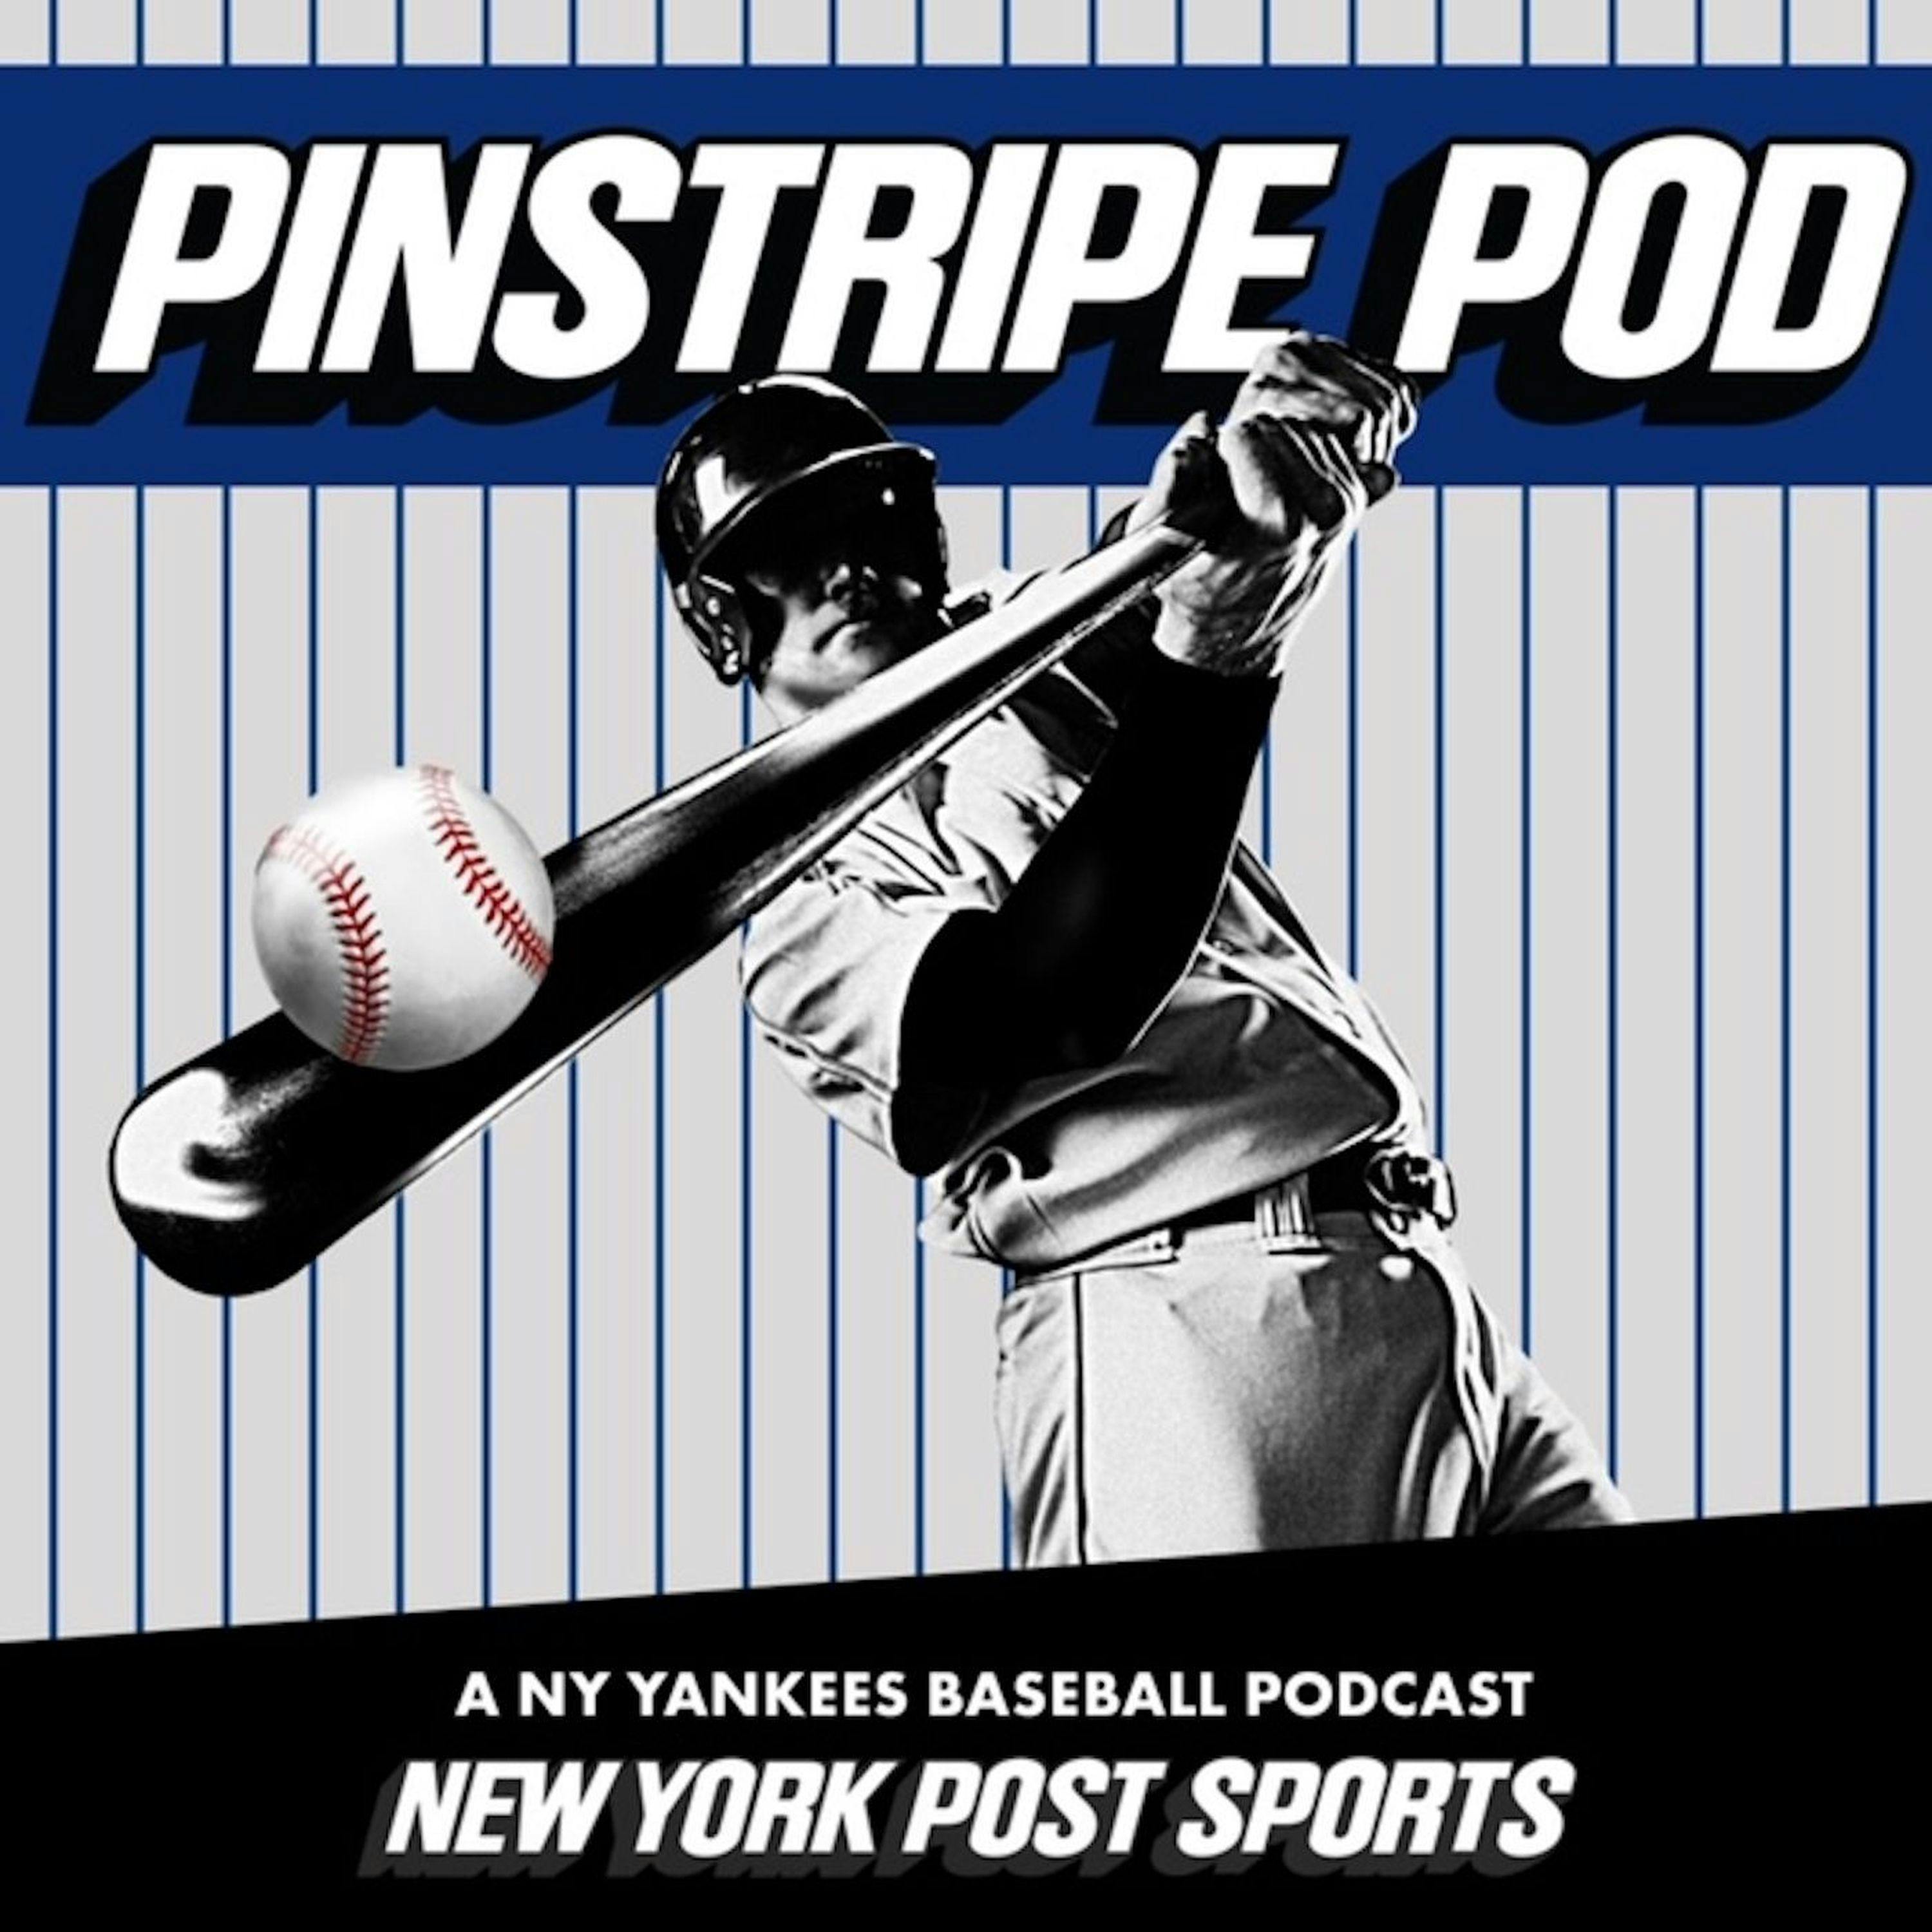 Episode 29: Yankees Playing For Home Field feat. Bob Lorenz